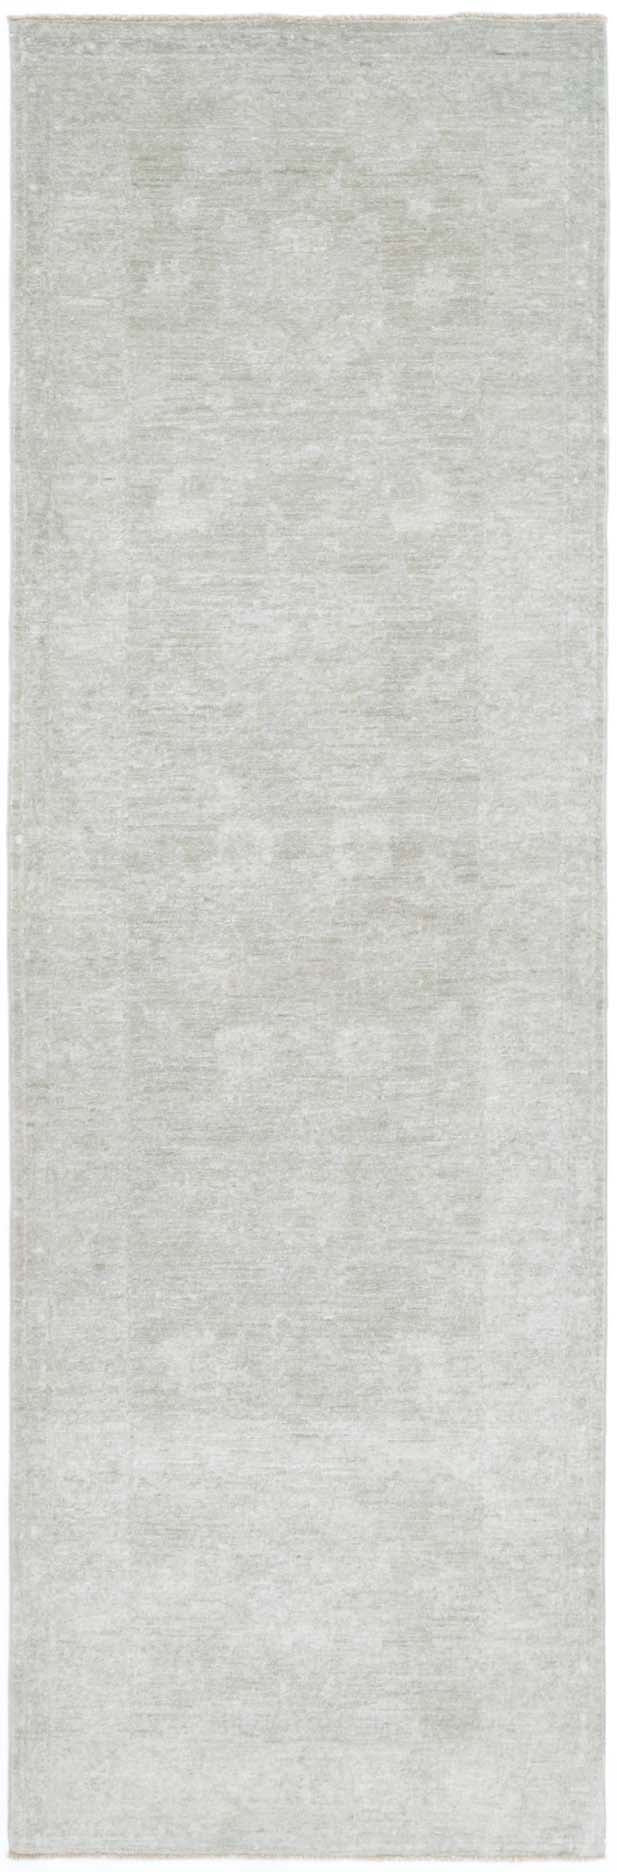 Hand Knotted Overdyed Wool Rug - 2'5'' x 8'5''